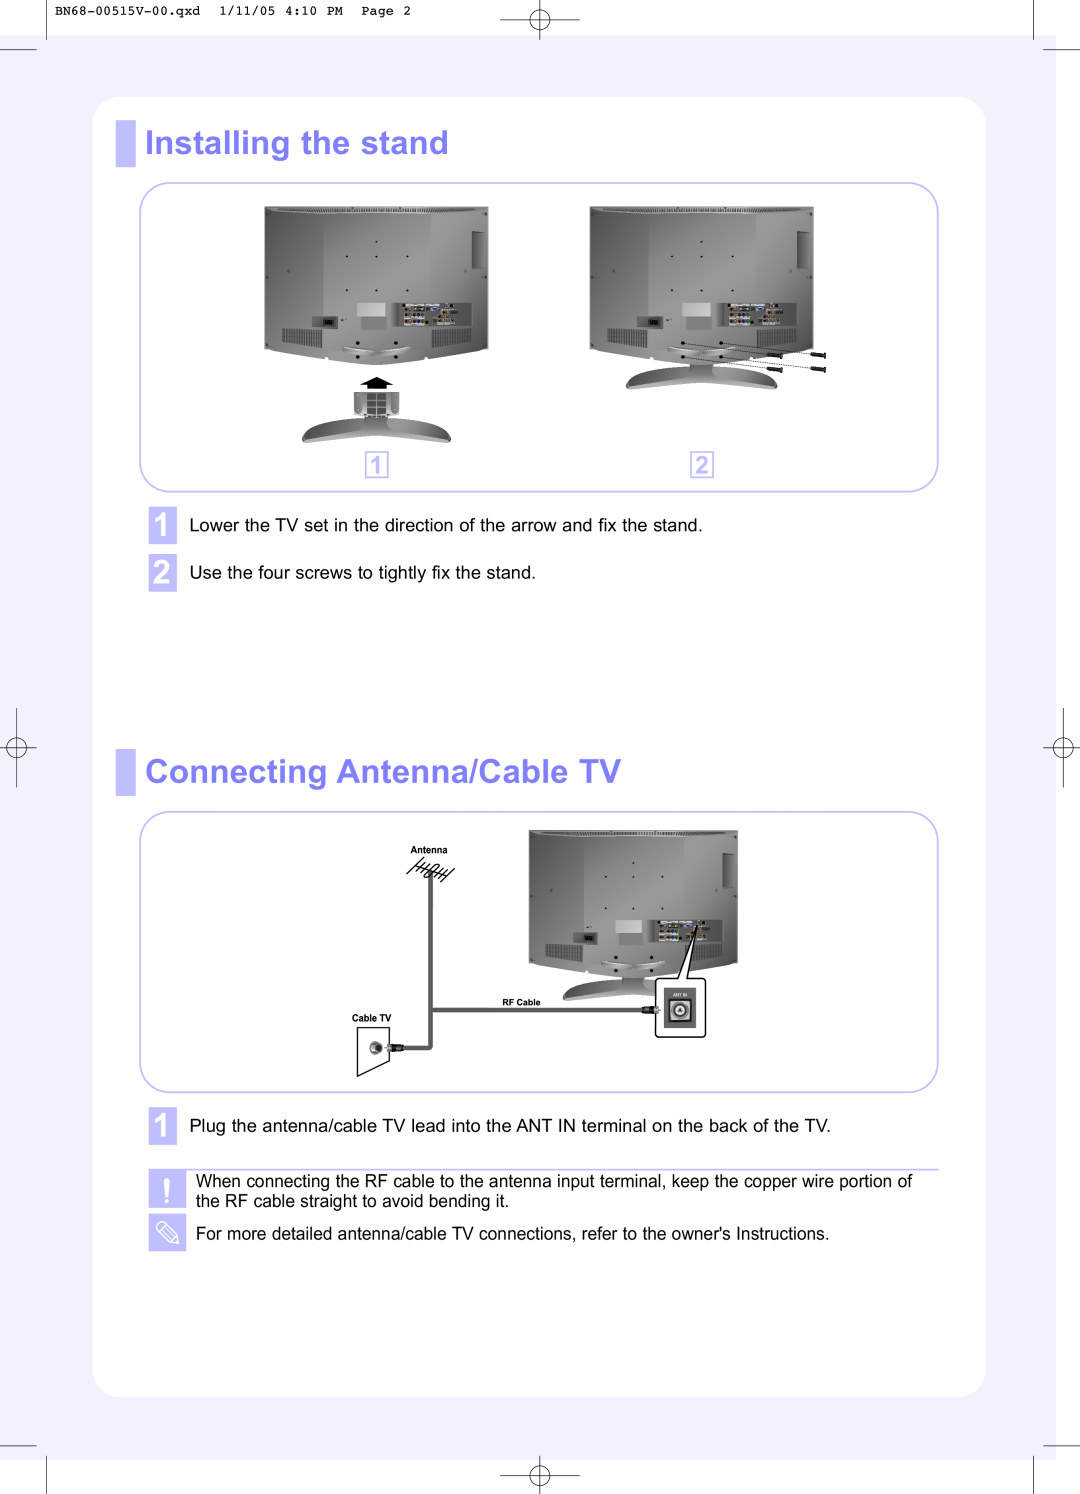 Samsung LN-R238W, LN-R328W, LN-R268W manual Installing the stand, Connecting Antenna/Cable TV 